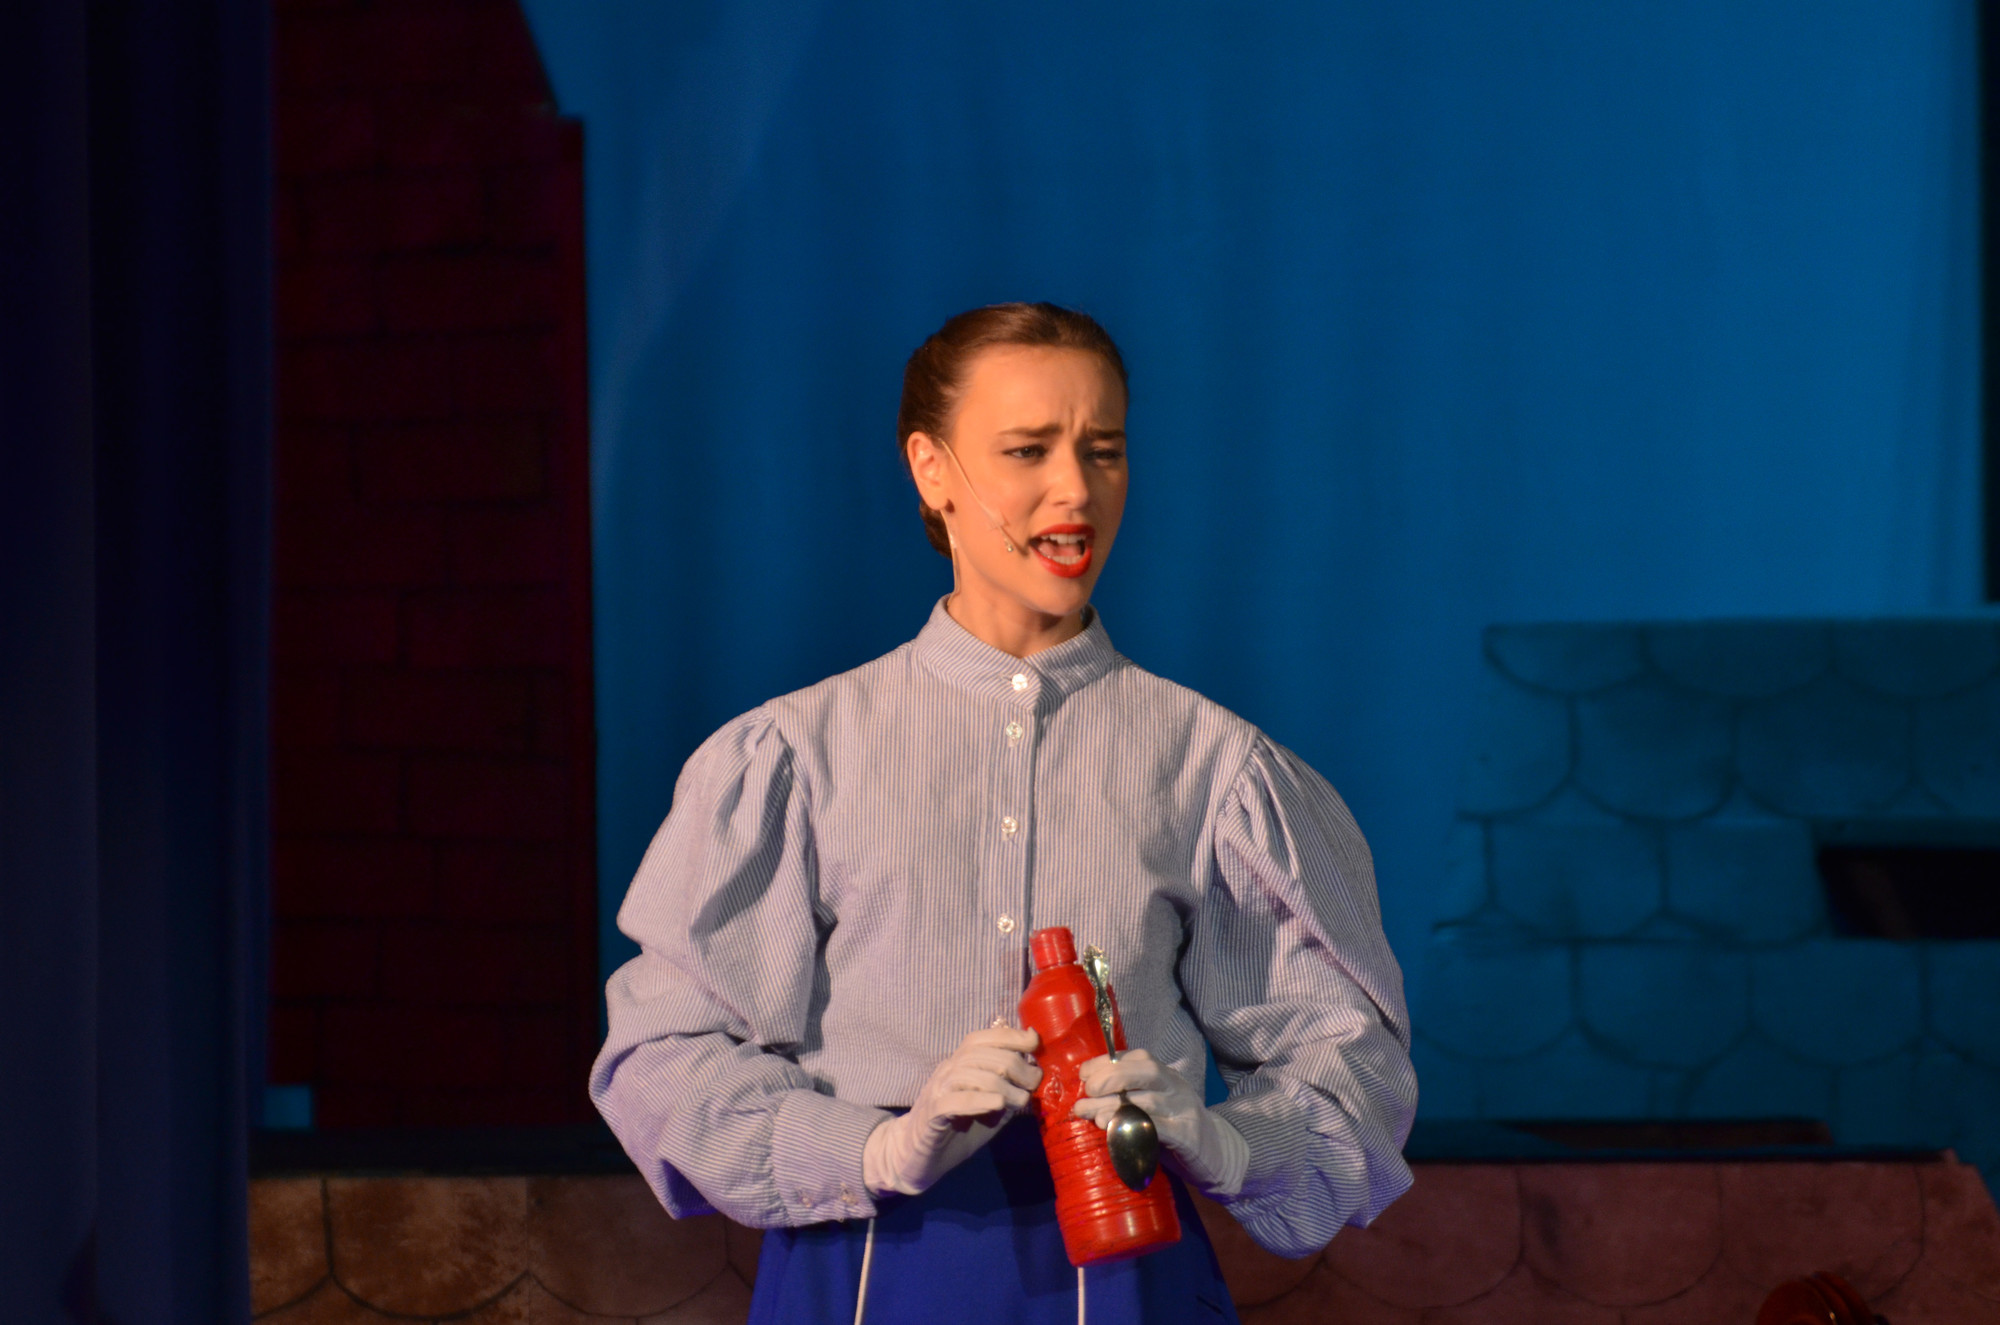 Mary Poppins played by Katharine Calabrese